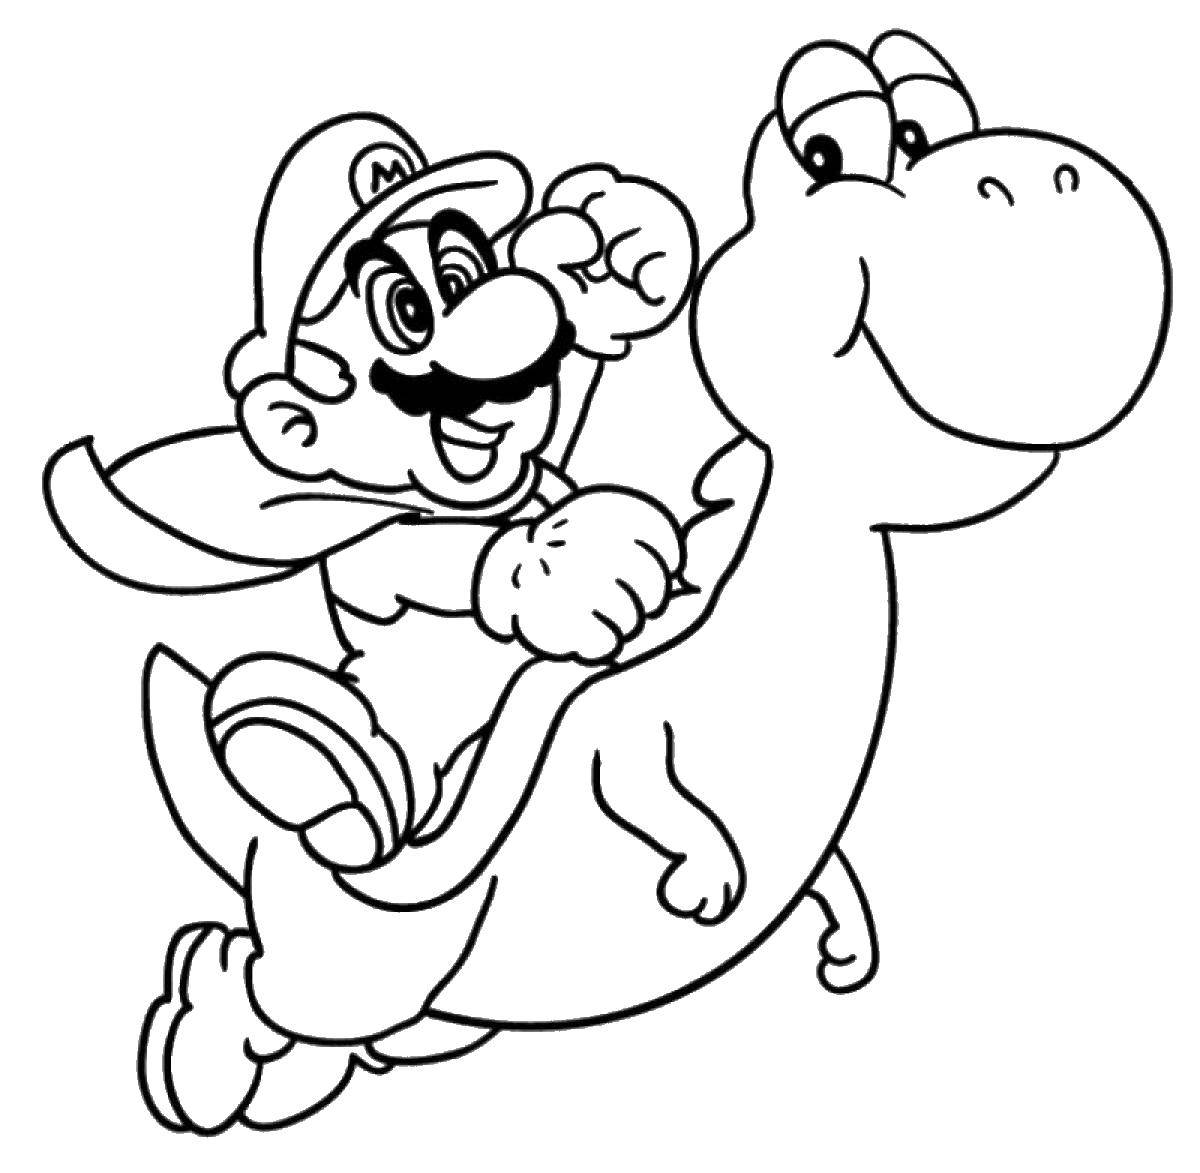 Coloring Super Mario riding a dinosaur. Category The character from the game. Tags:  Super Mario.